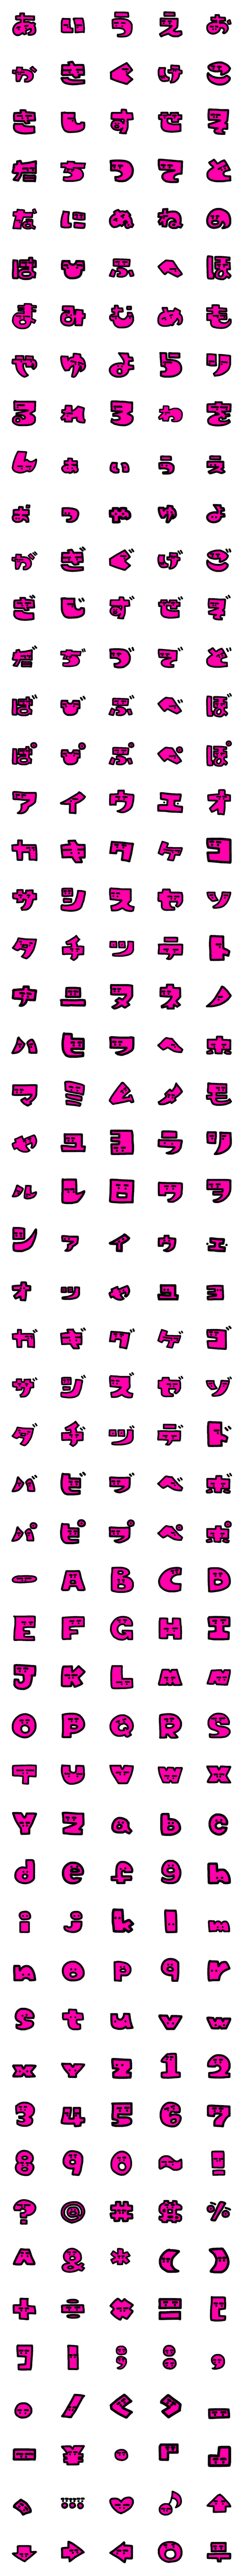 [LINE絵文字]顔が入っています（文字のみ）の画像一覧